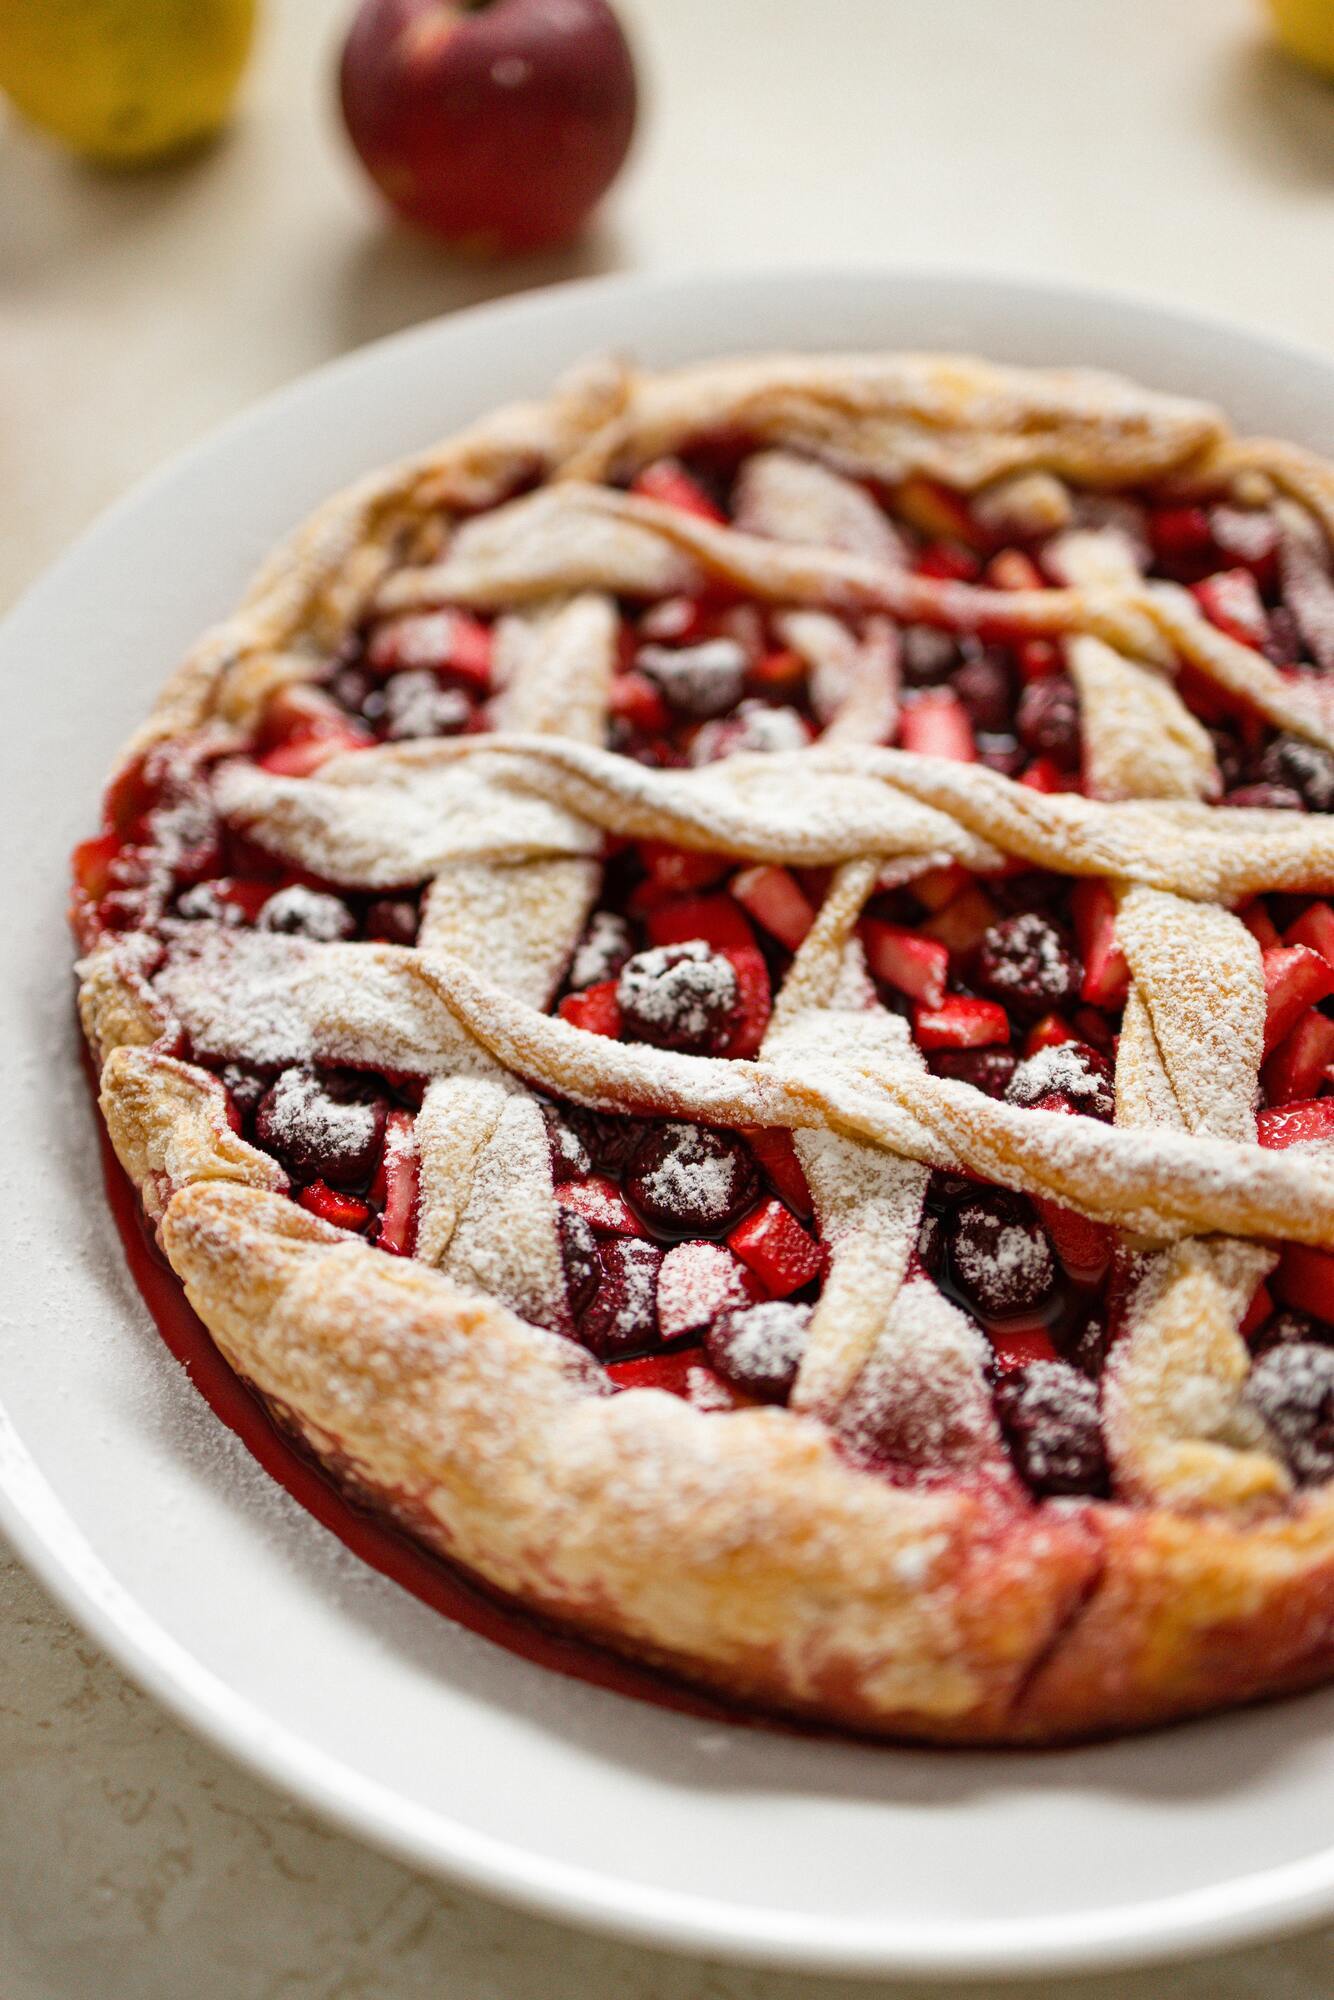 Pie with berries